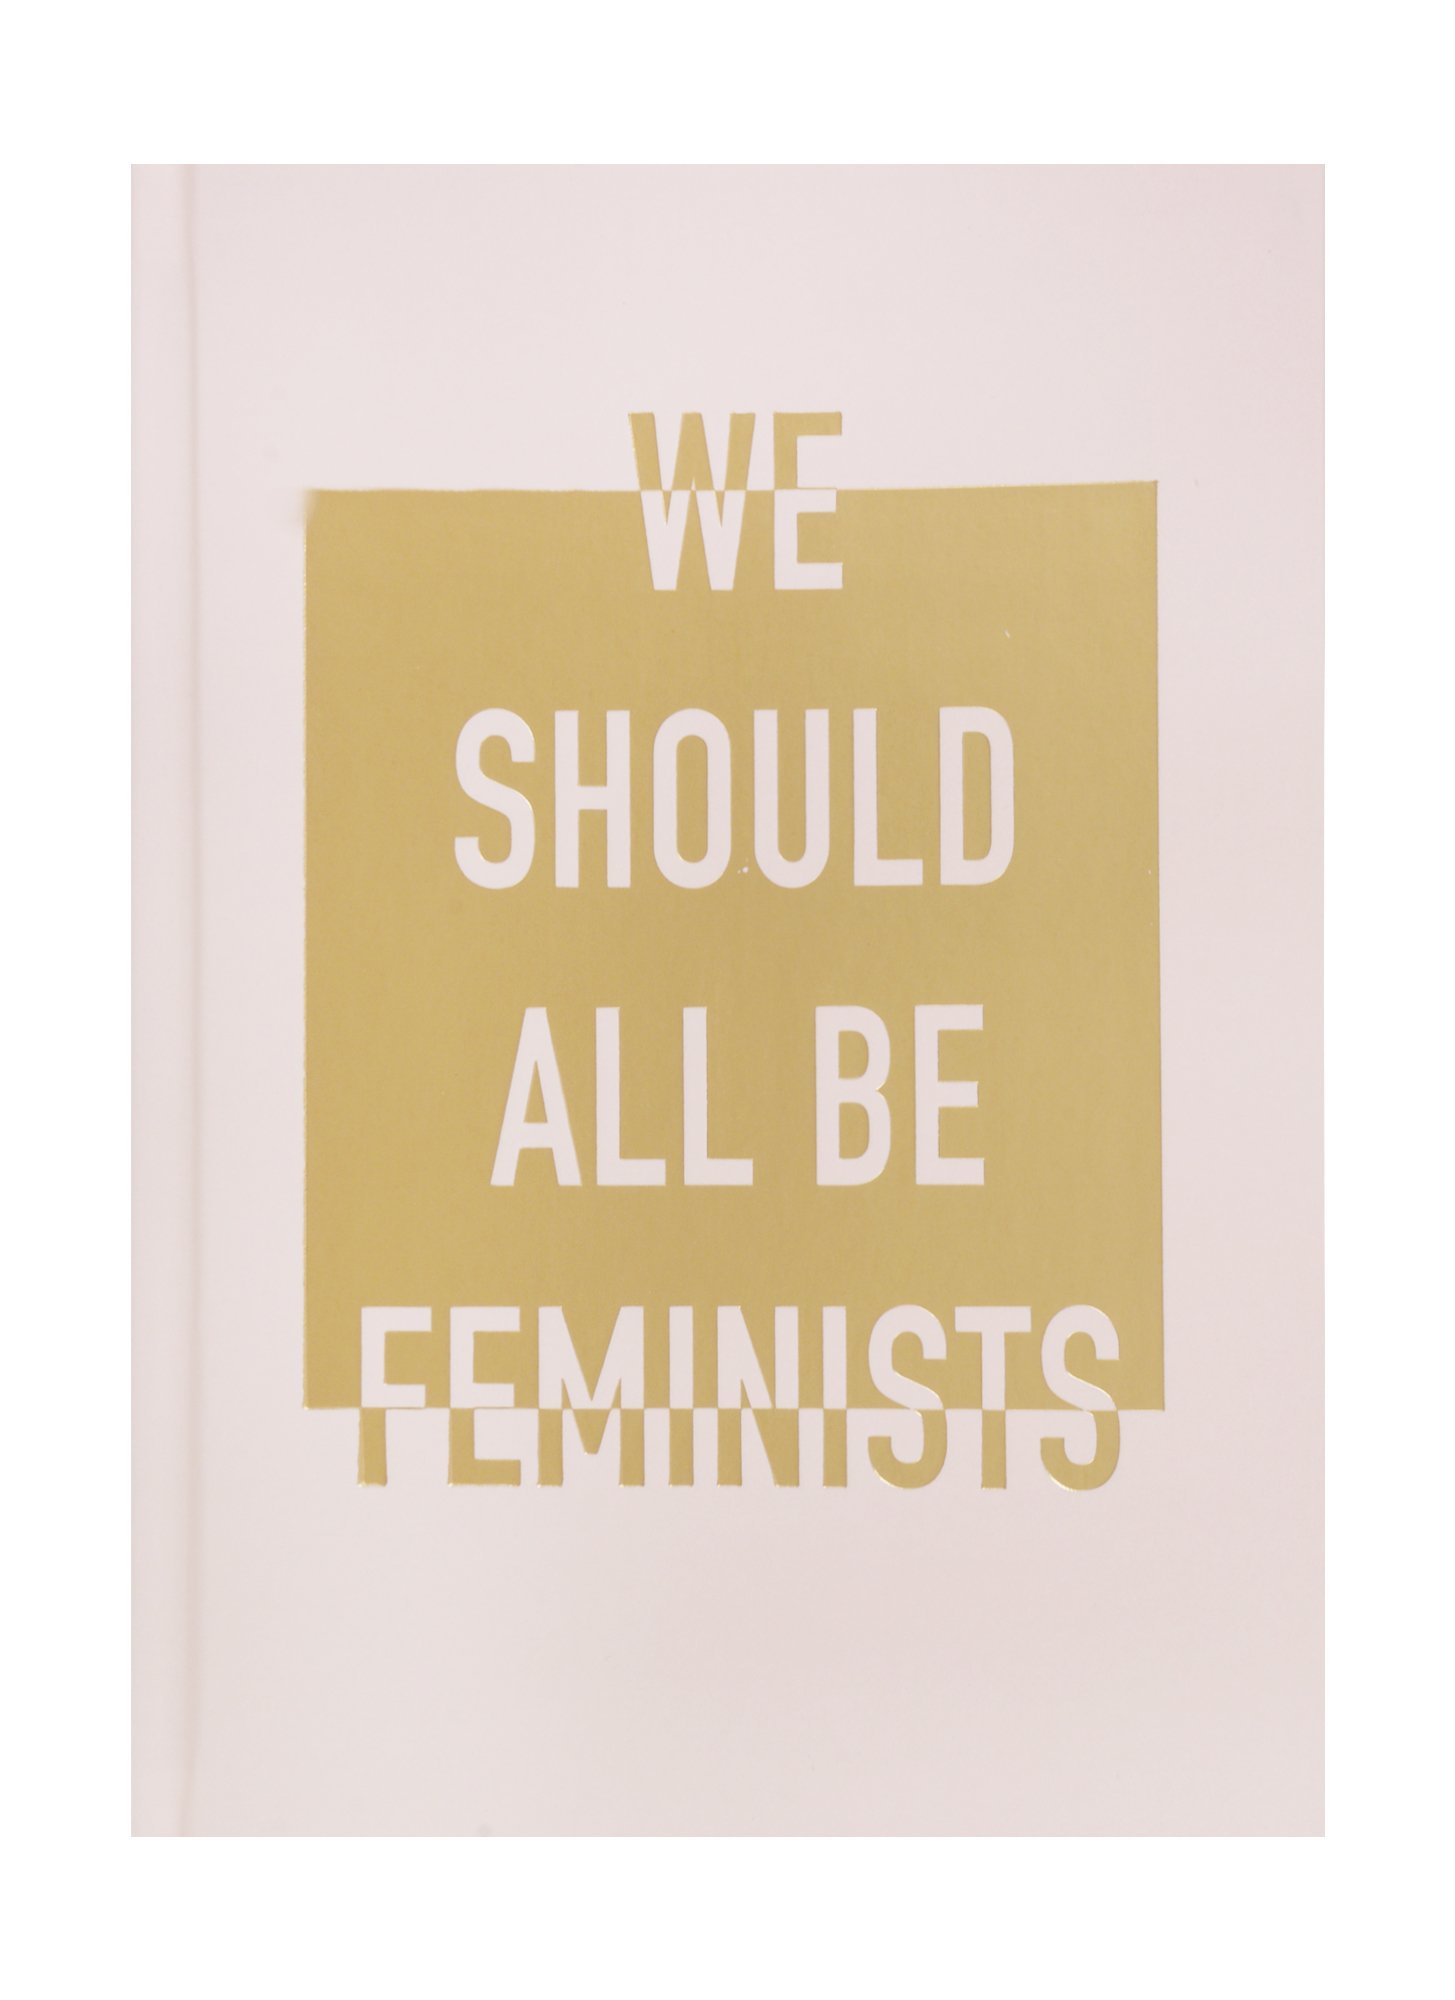  We should all be feminists, 5, 80 